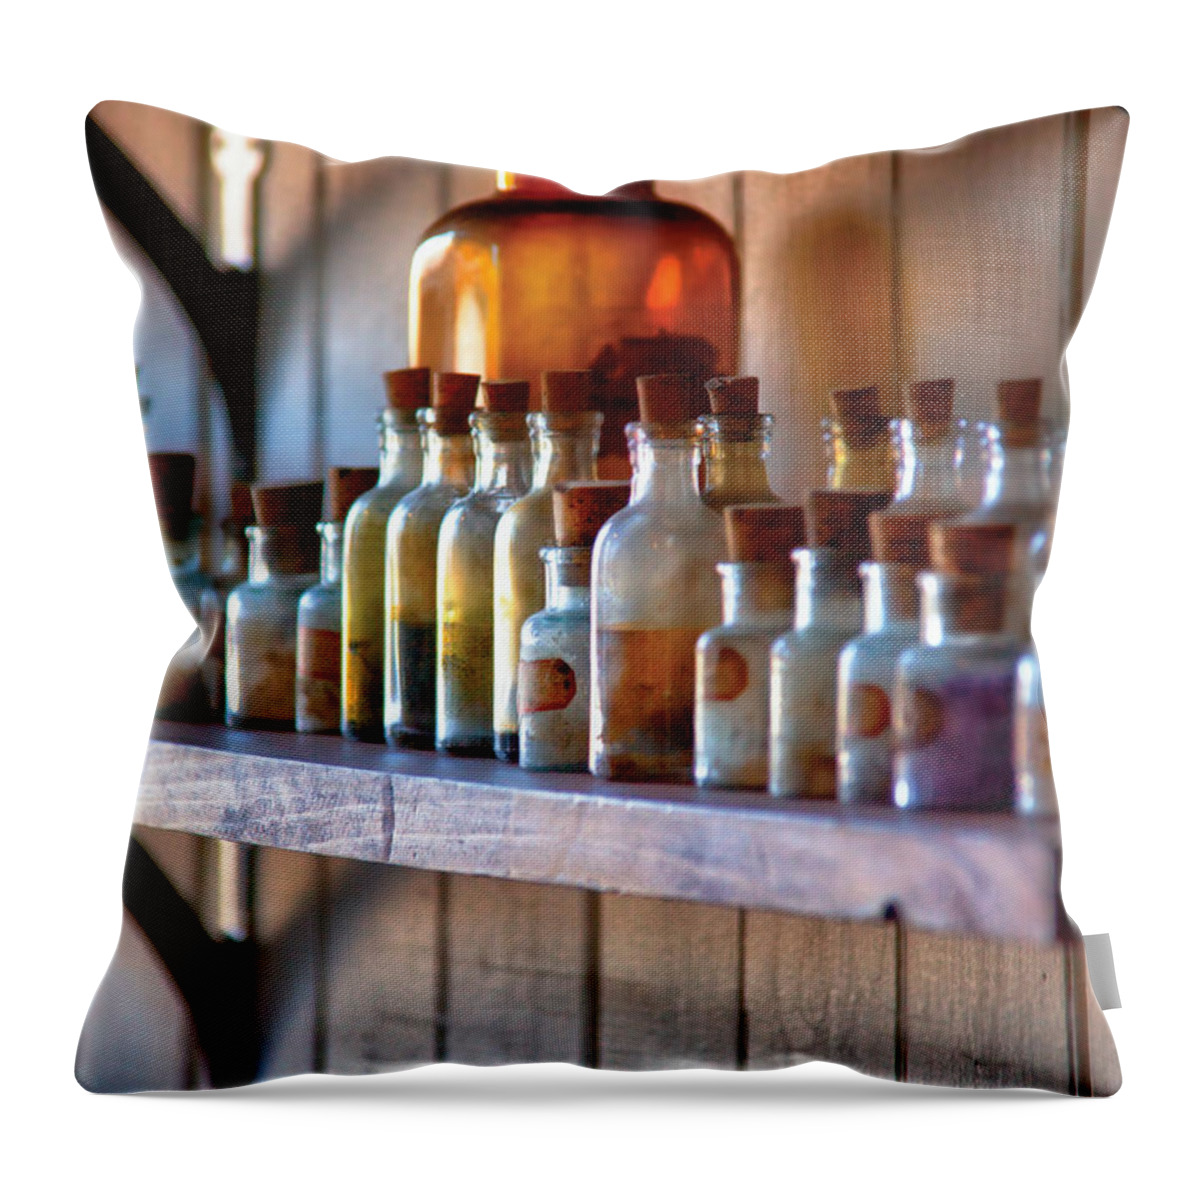 Chemist Throw Pillow featuring the photograph Chemist - Magical Ingredients by Mike Savad